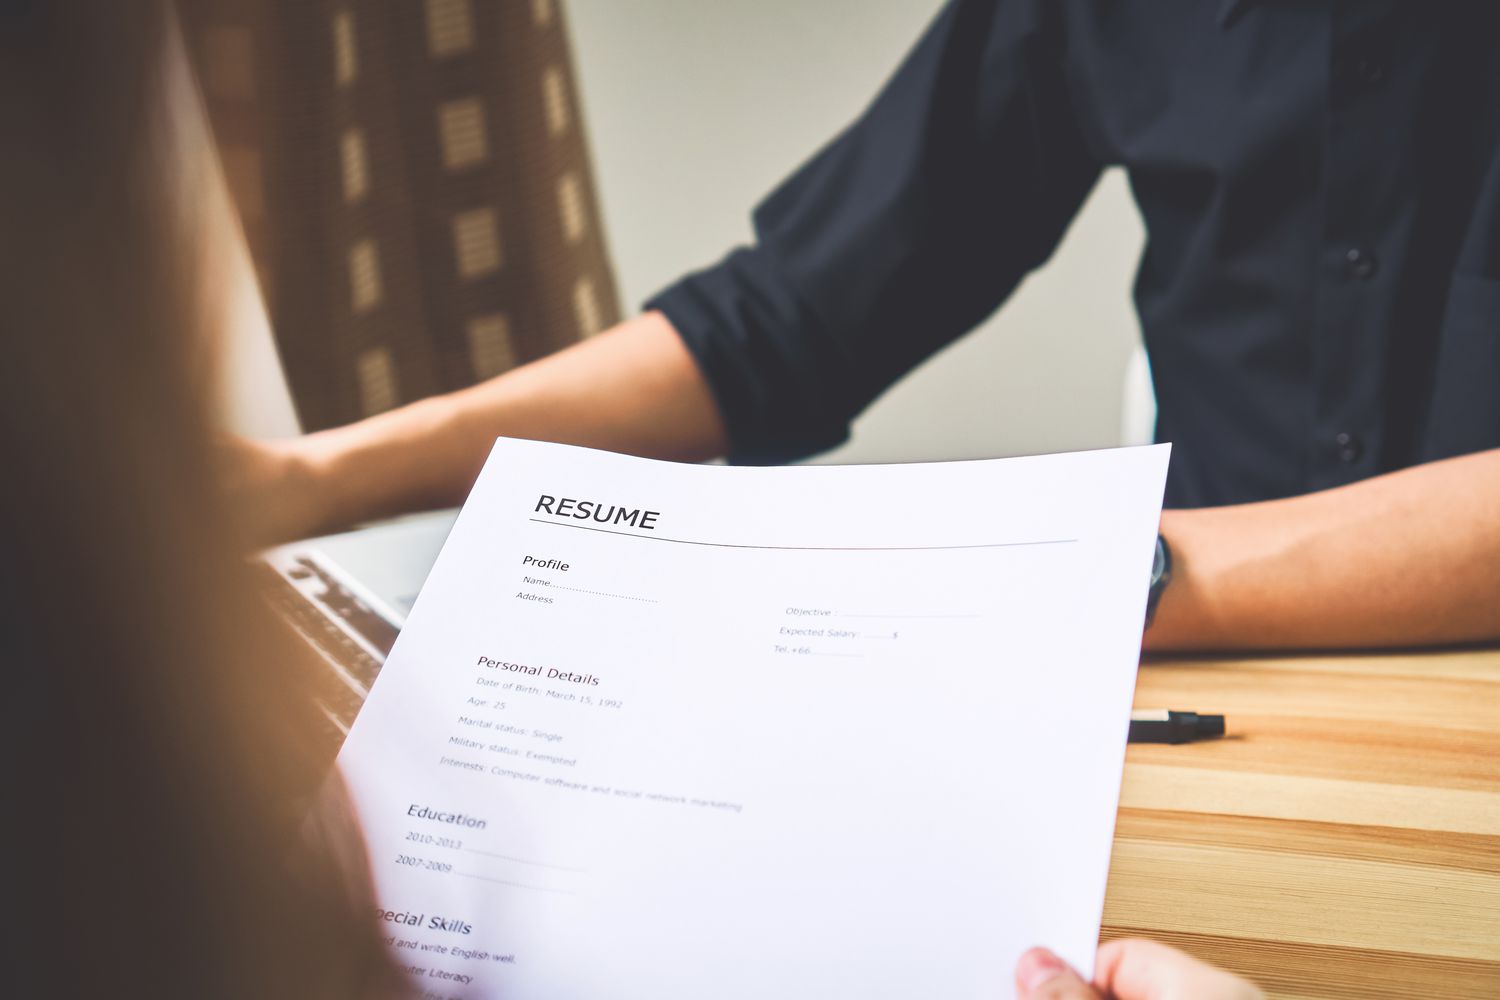 How to Write a Product Manager Resume: A Step-by-Step Guide with Examples